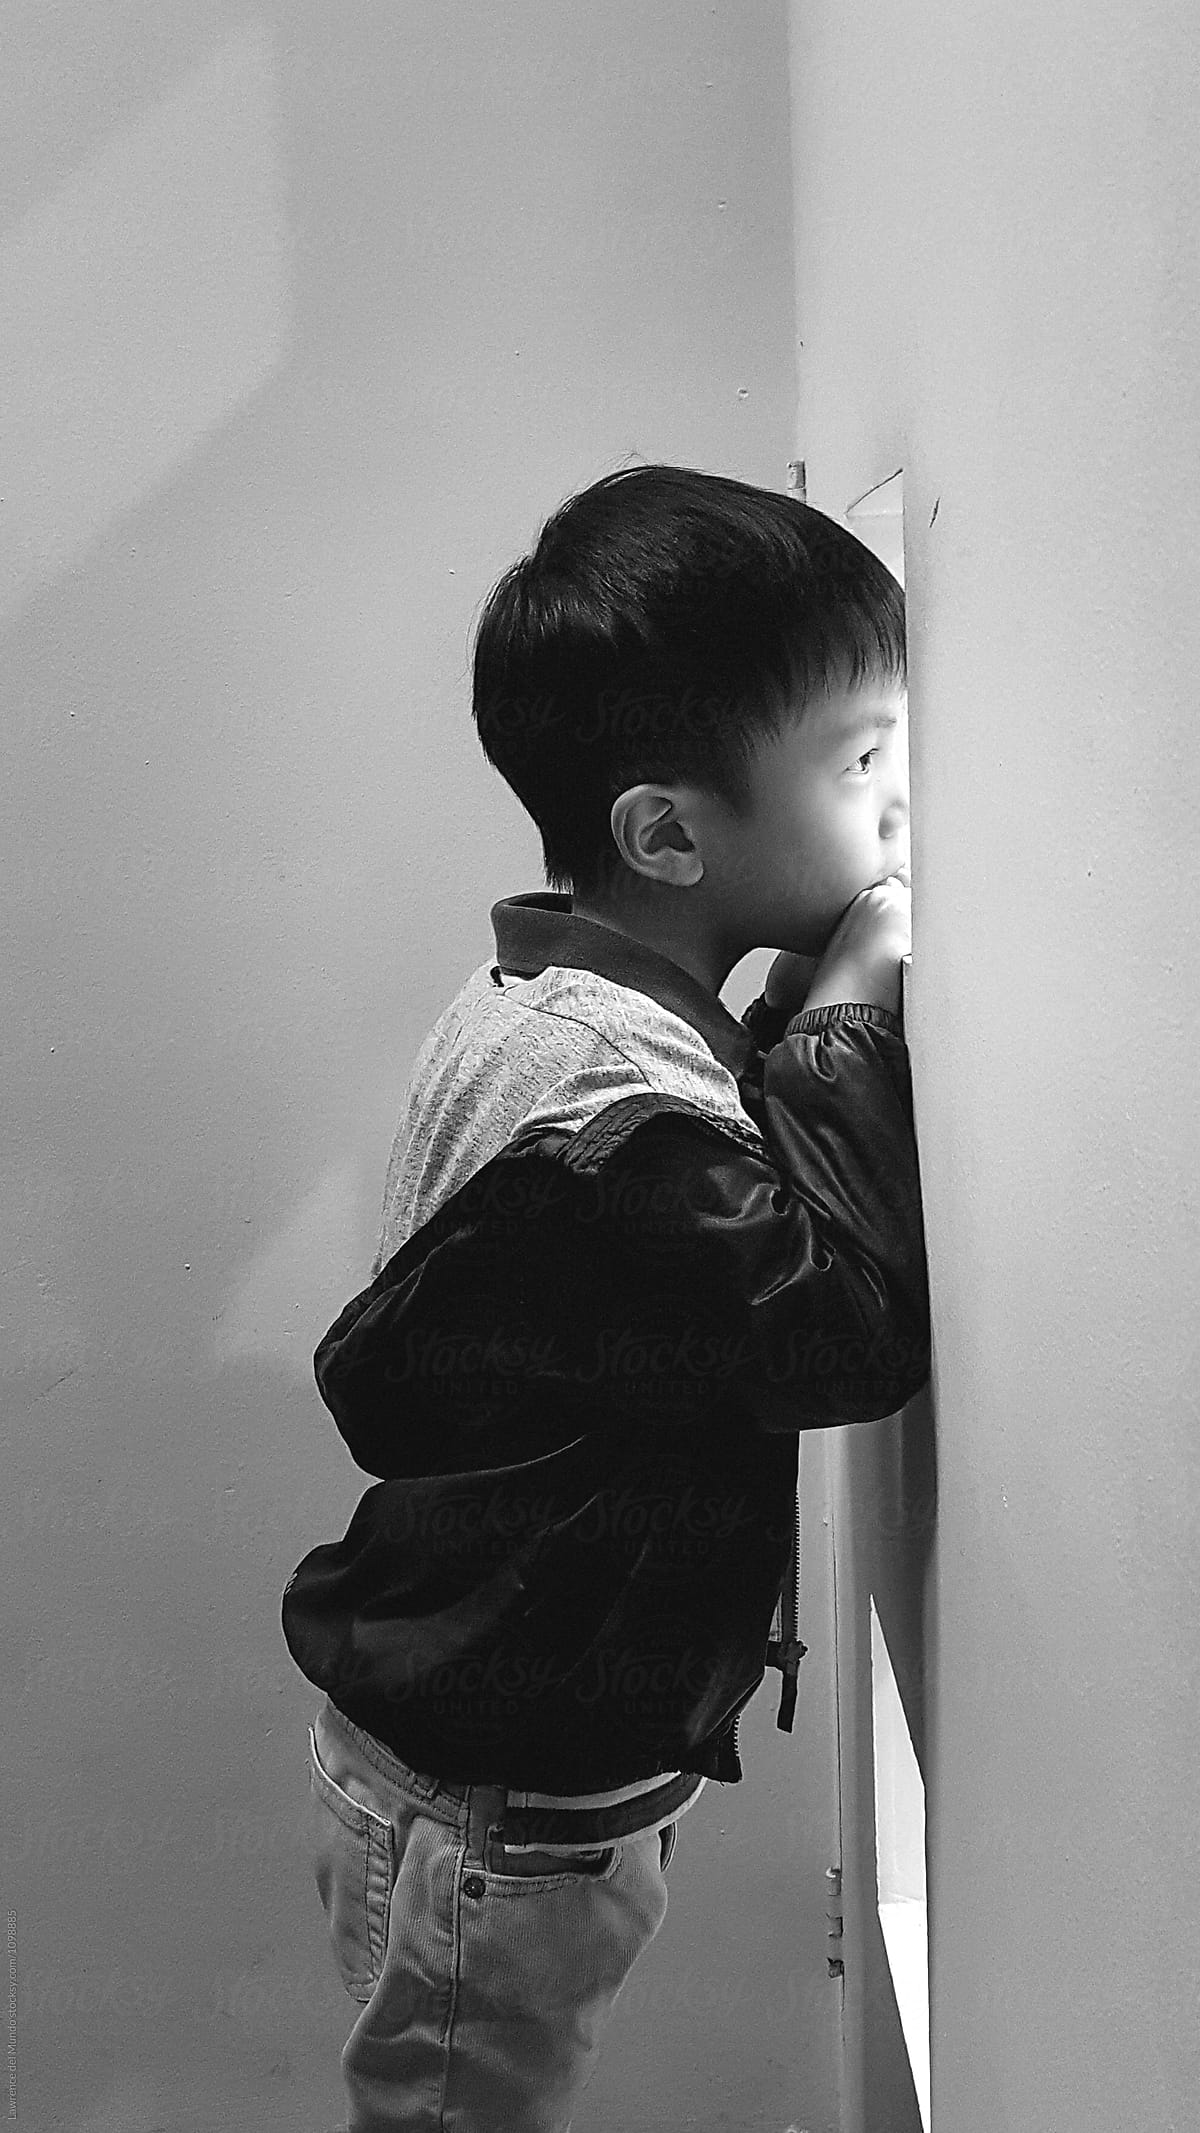 Young child peeking through a hole on the wall.